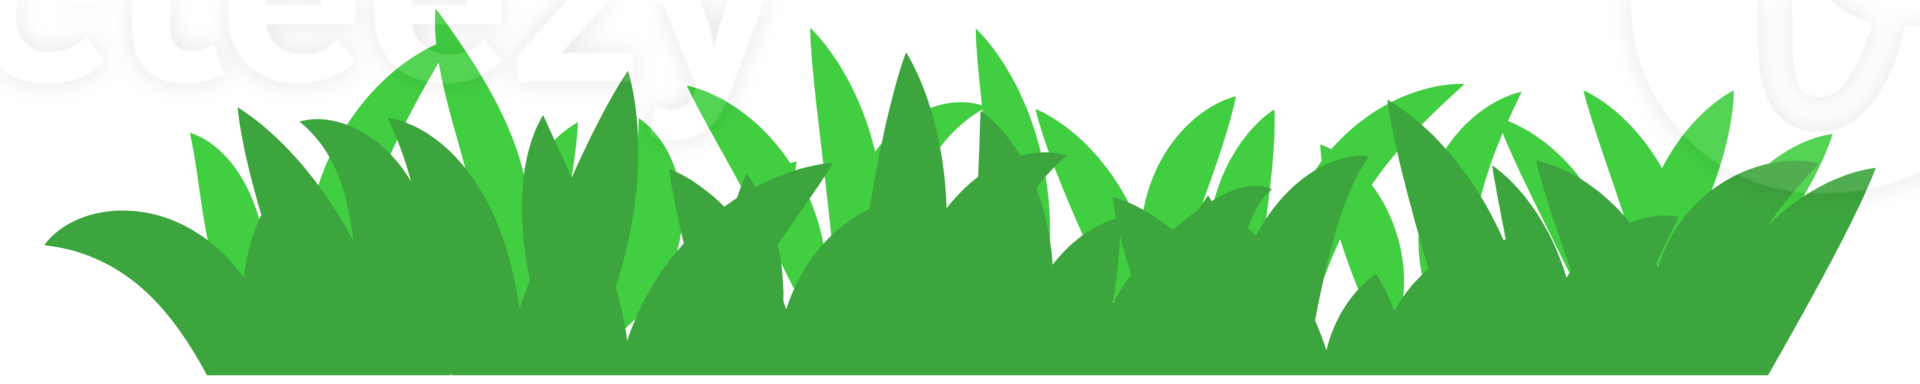 illustration of green grass png